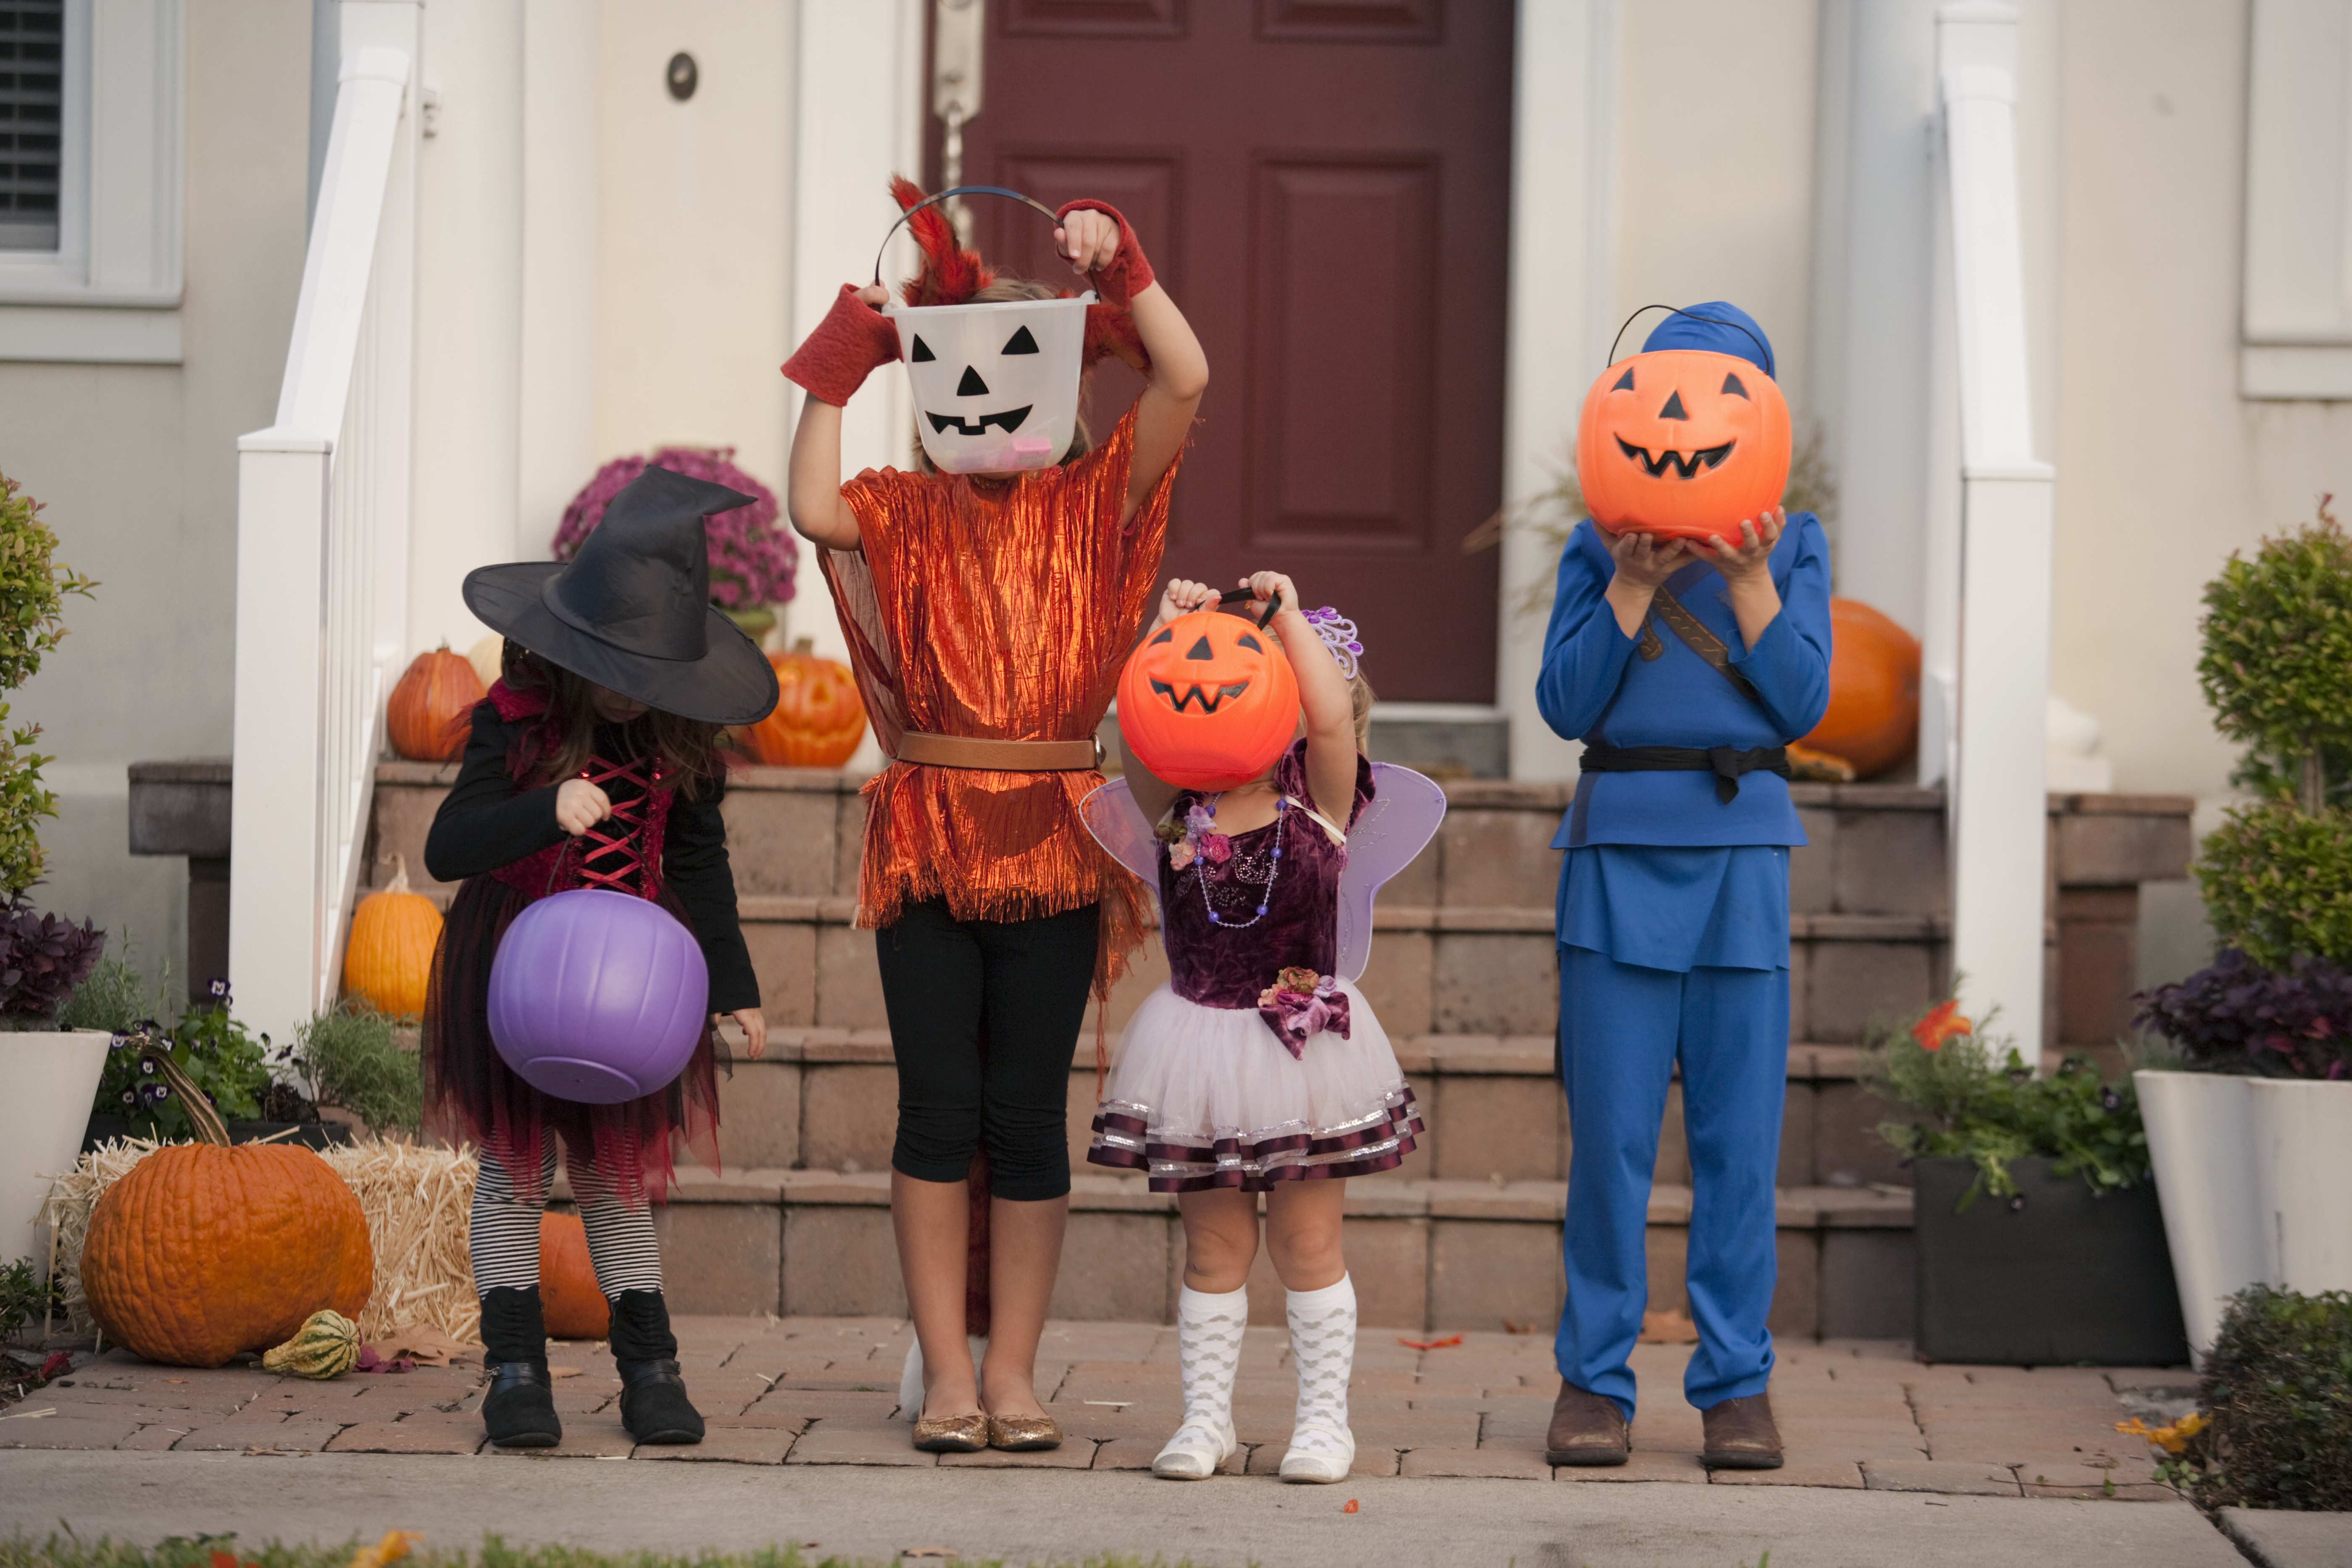 Target Made A Halloween App That Finds The Best Trick-or-Treating Houses.